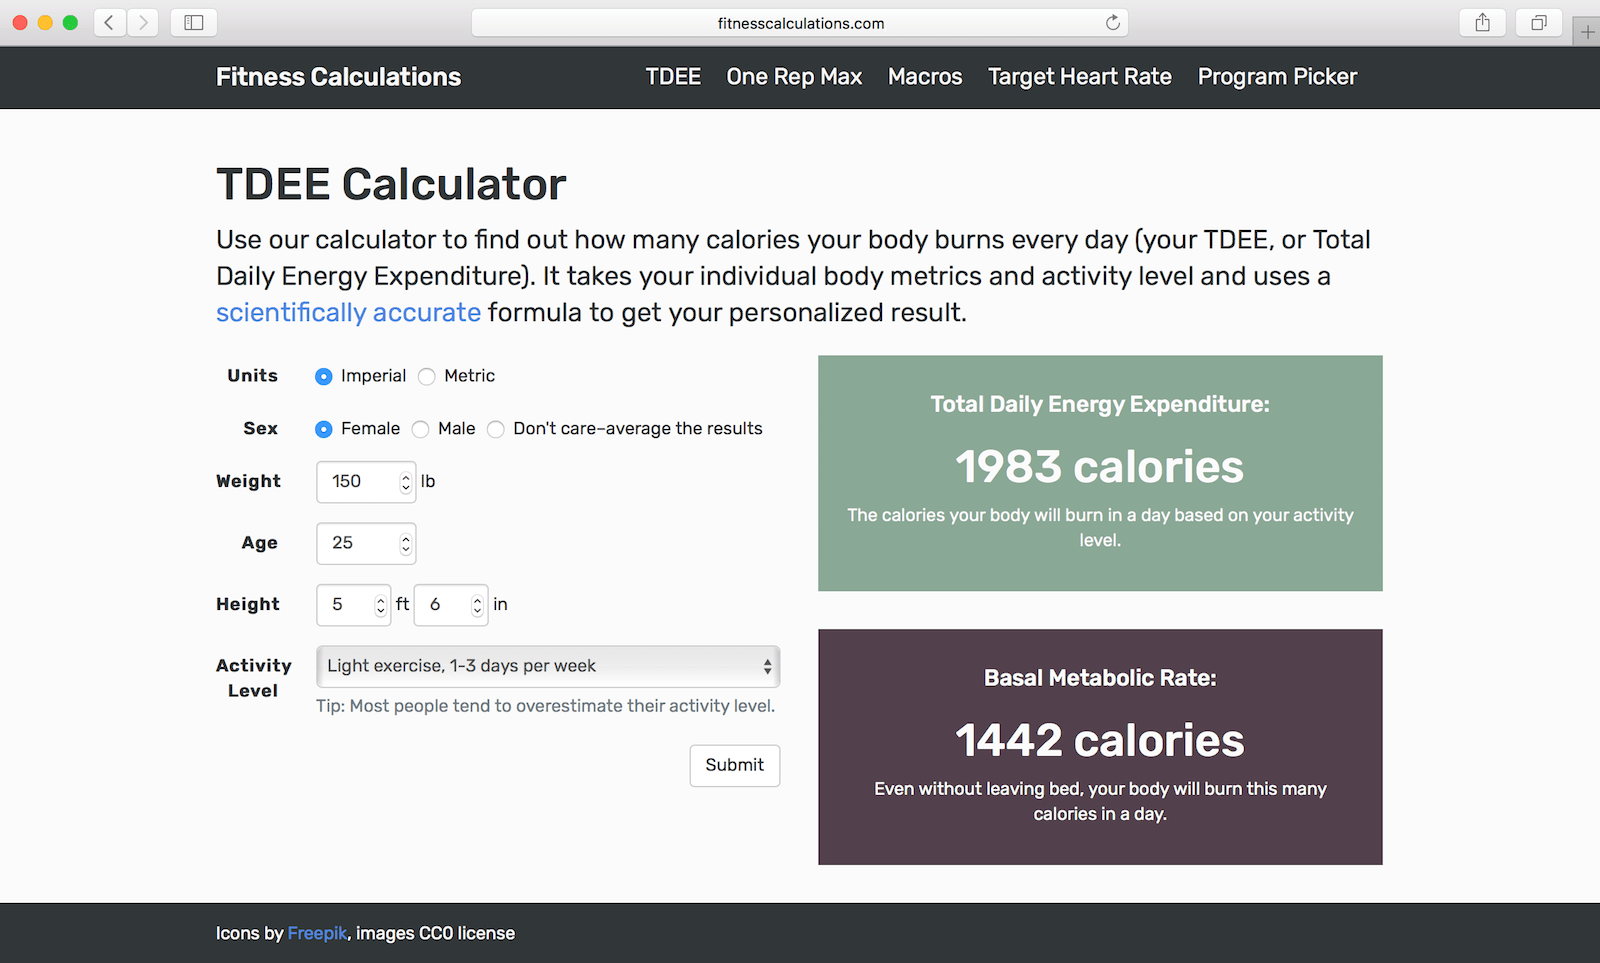 A screenshot of the fitness calculations site.